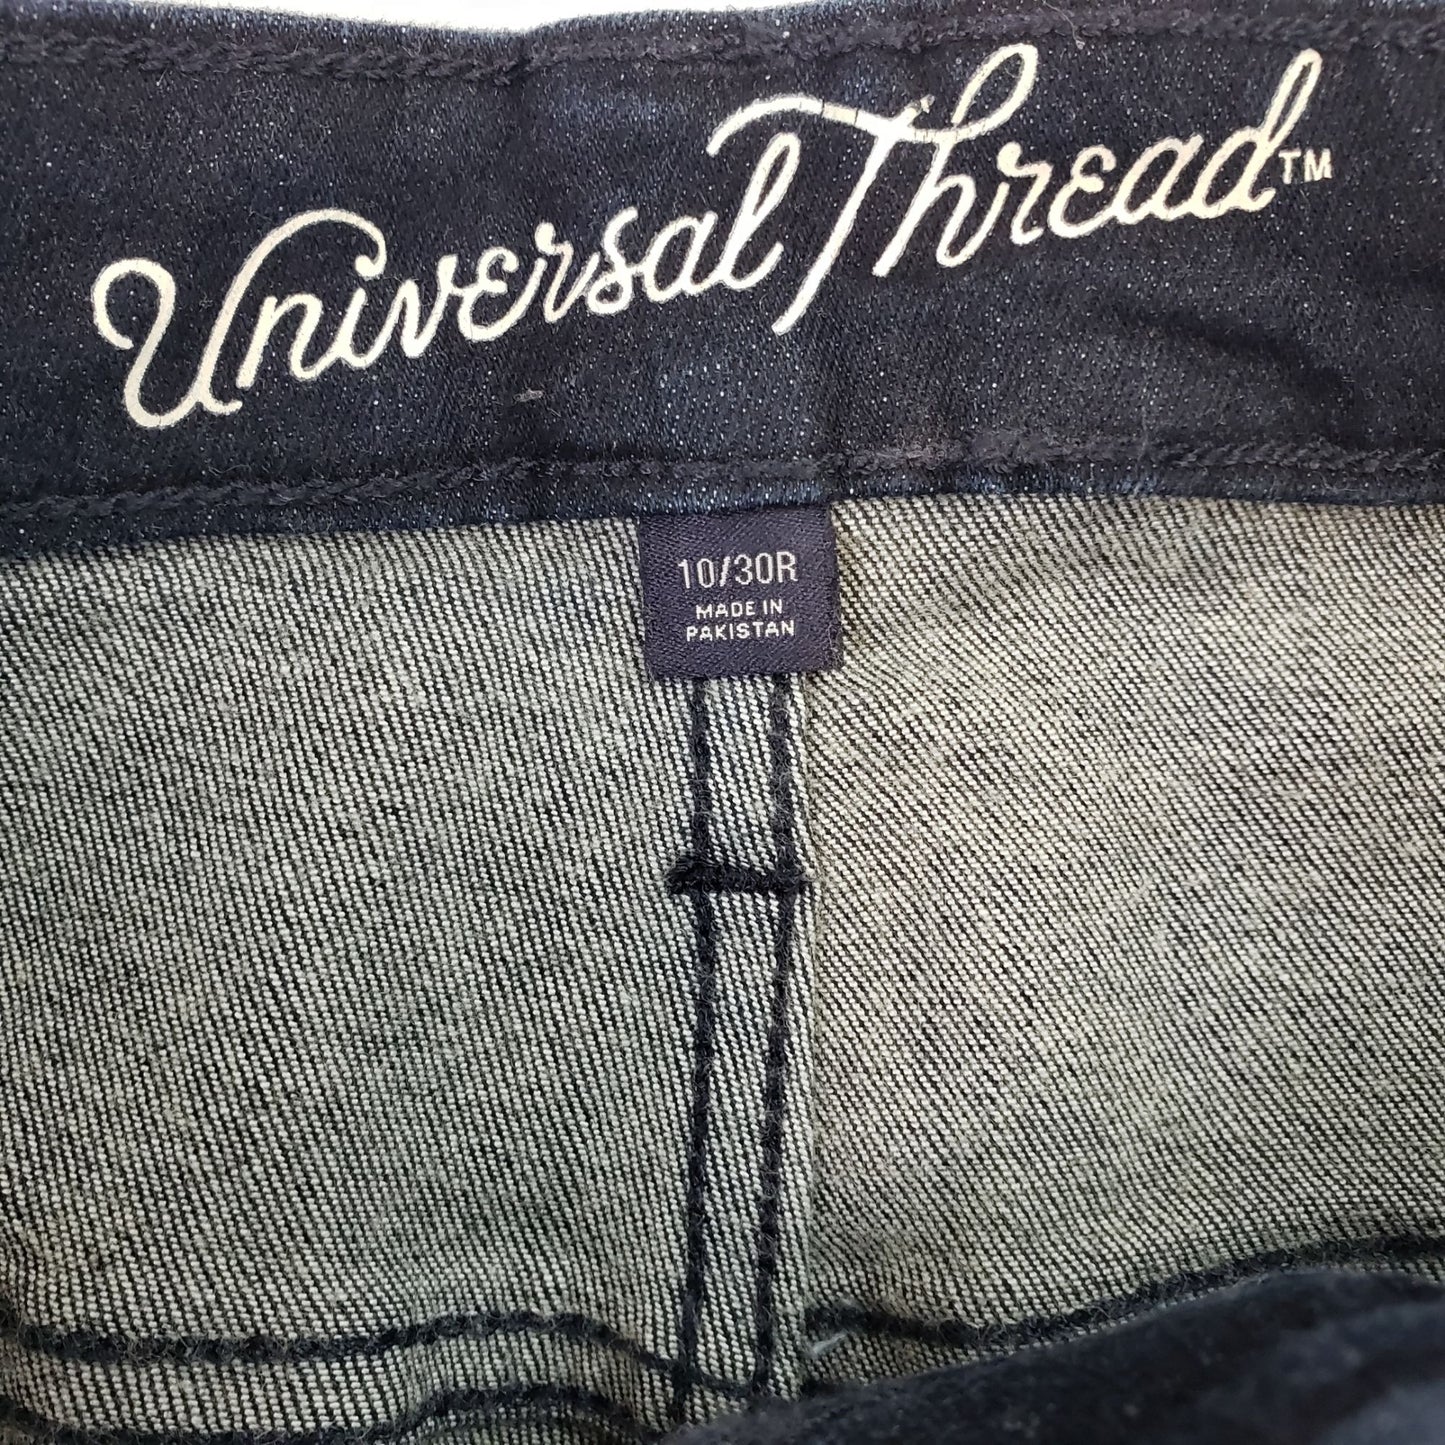 NWOT Universal Thread High Rise Skinny Jeans in Dark Wash Size 10